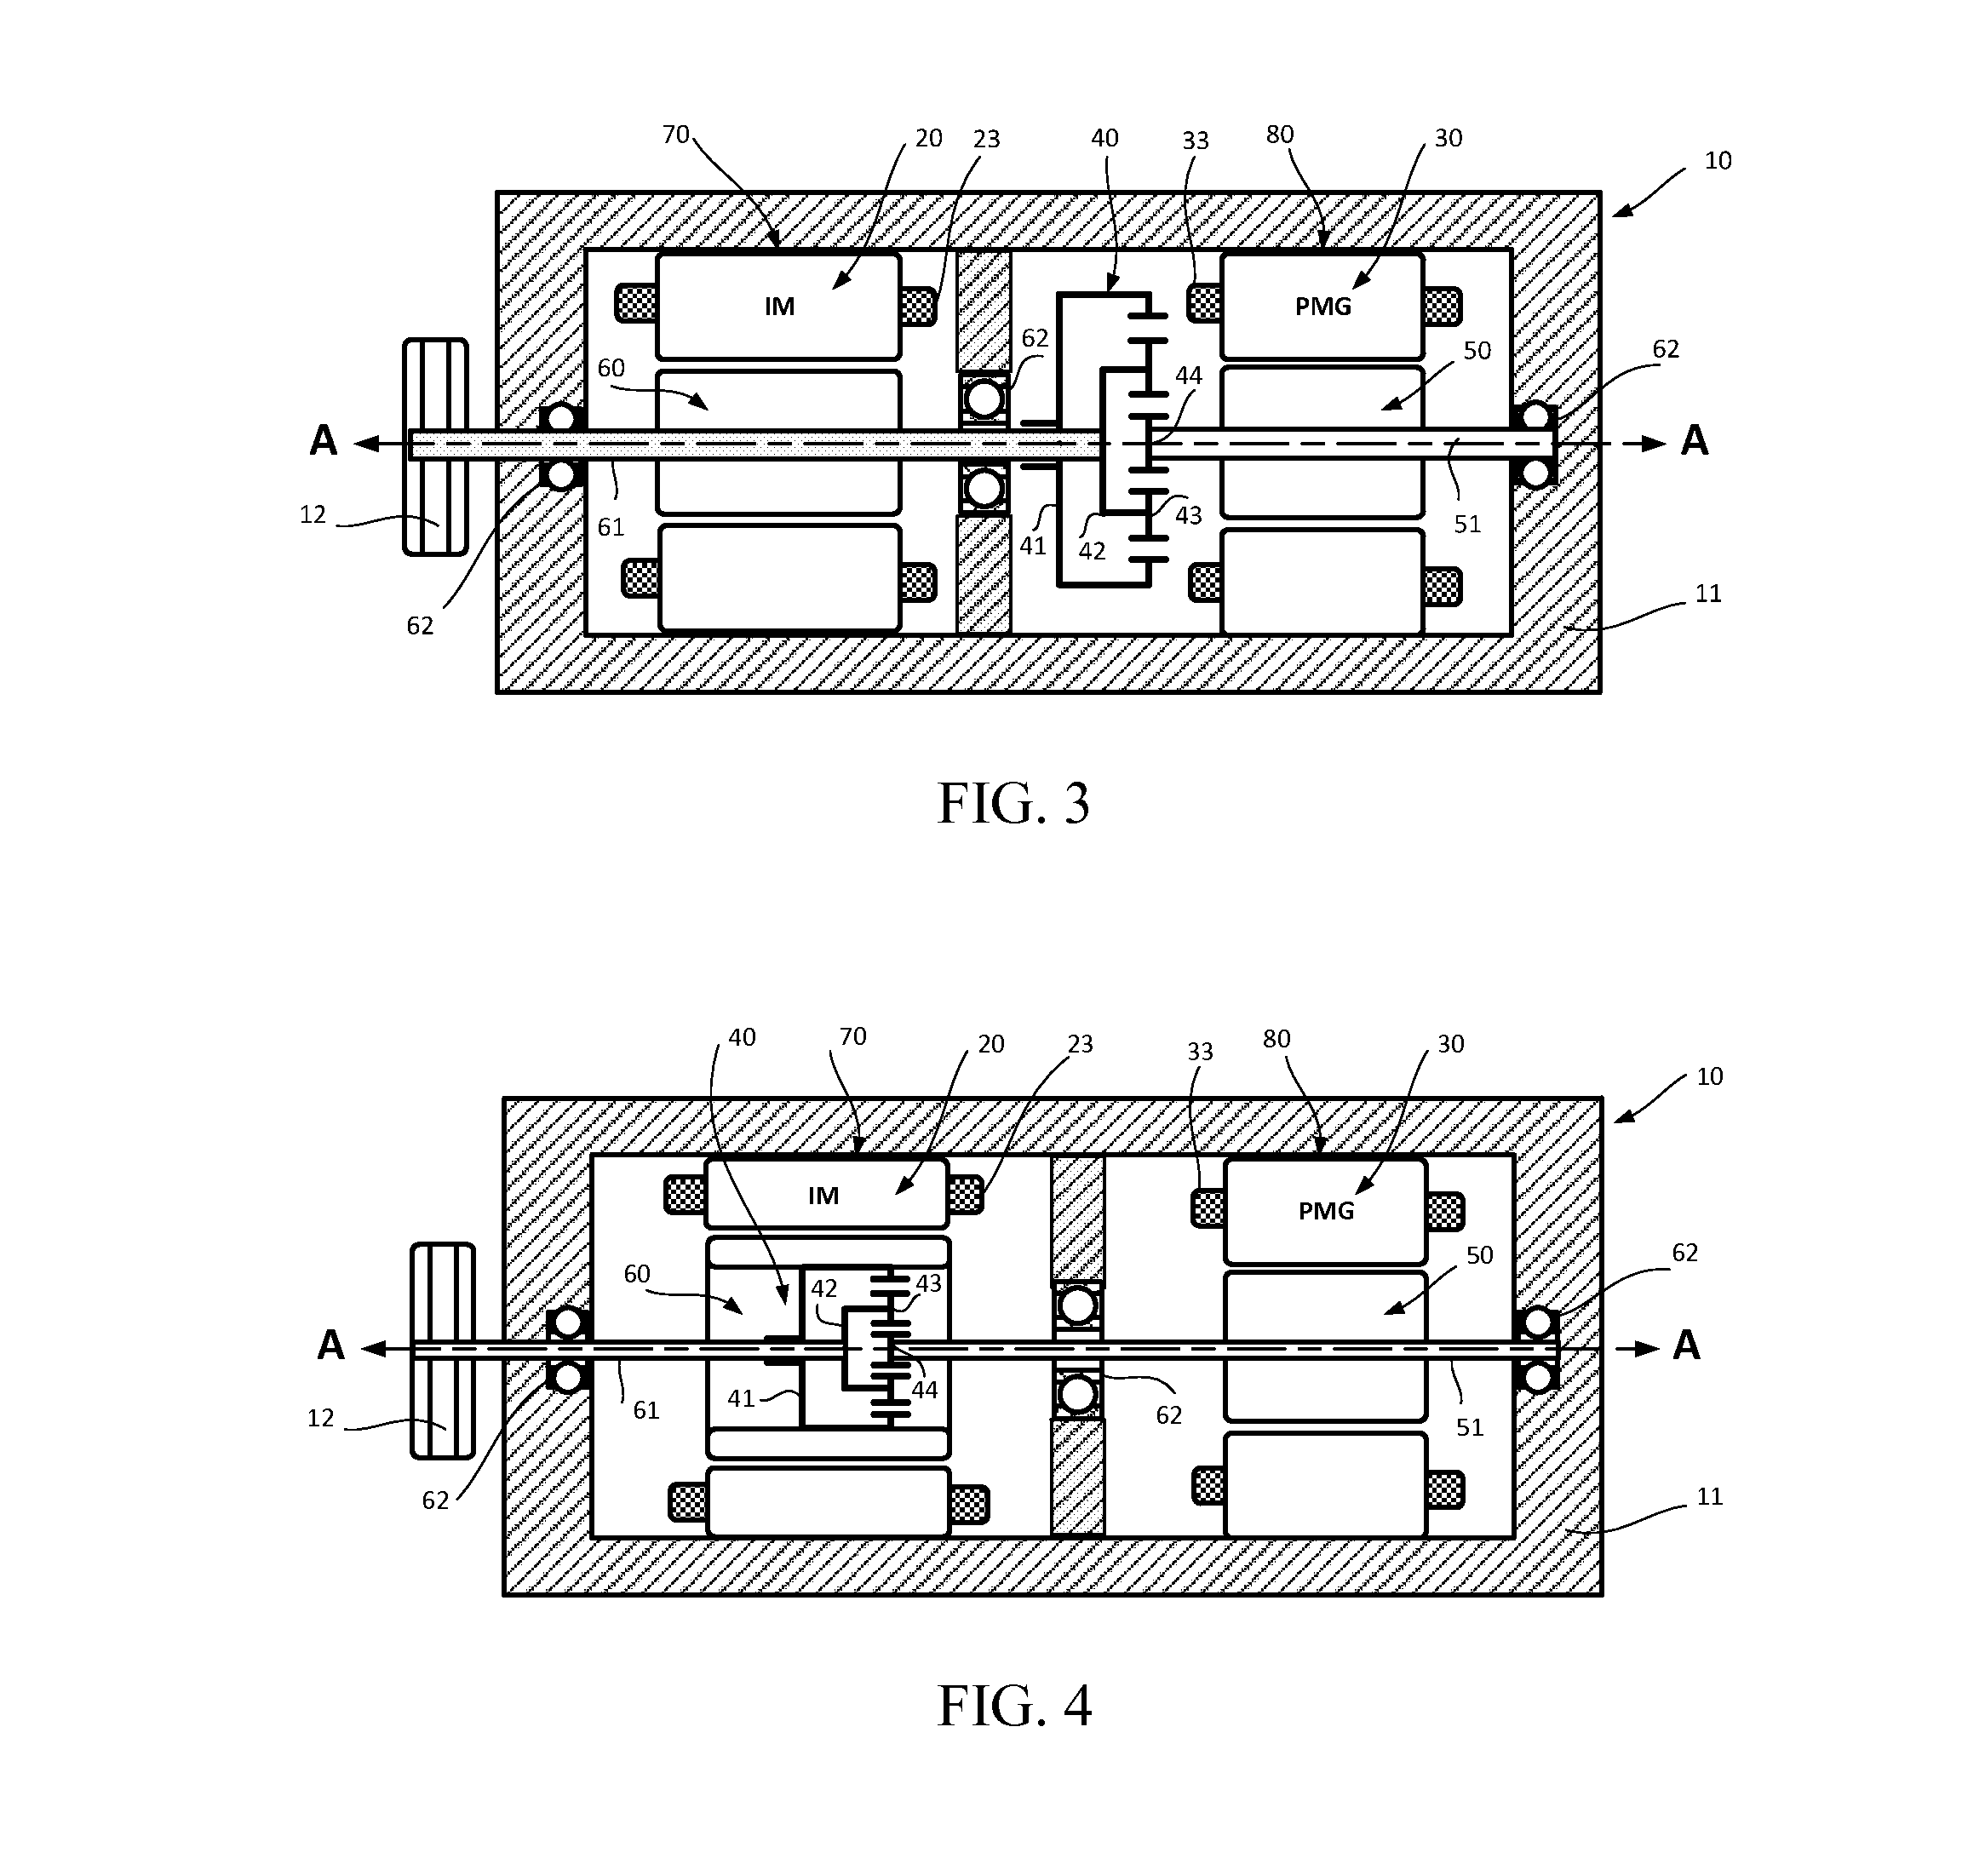 Dual-structured electric drive and power system for hybrid vehicles